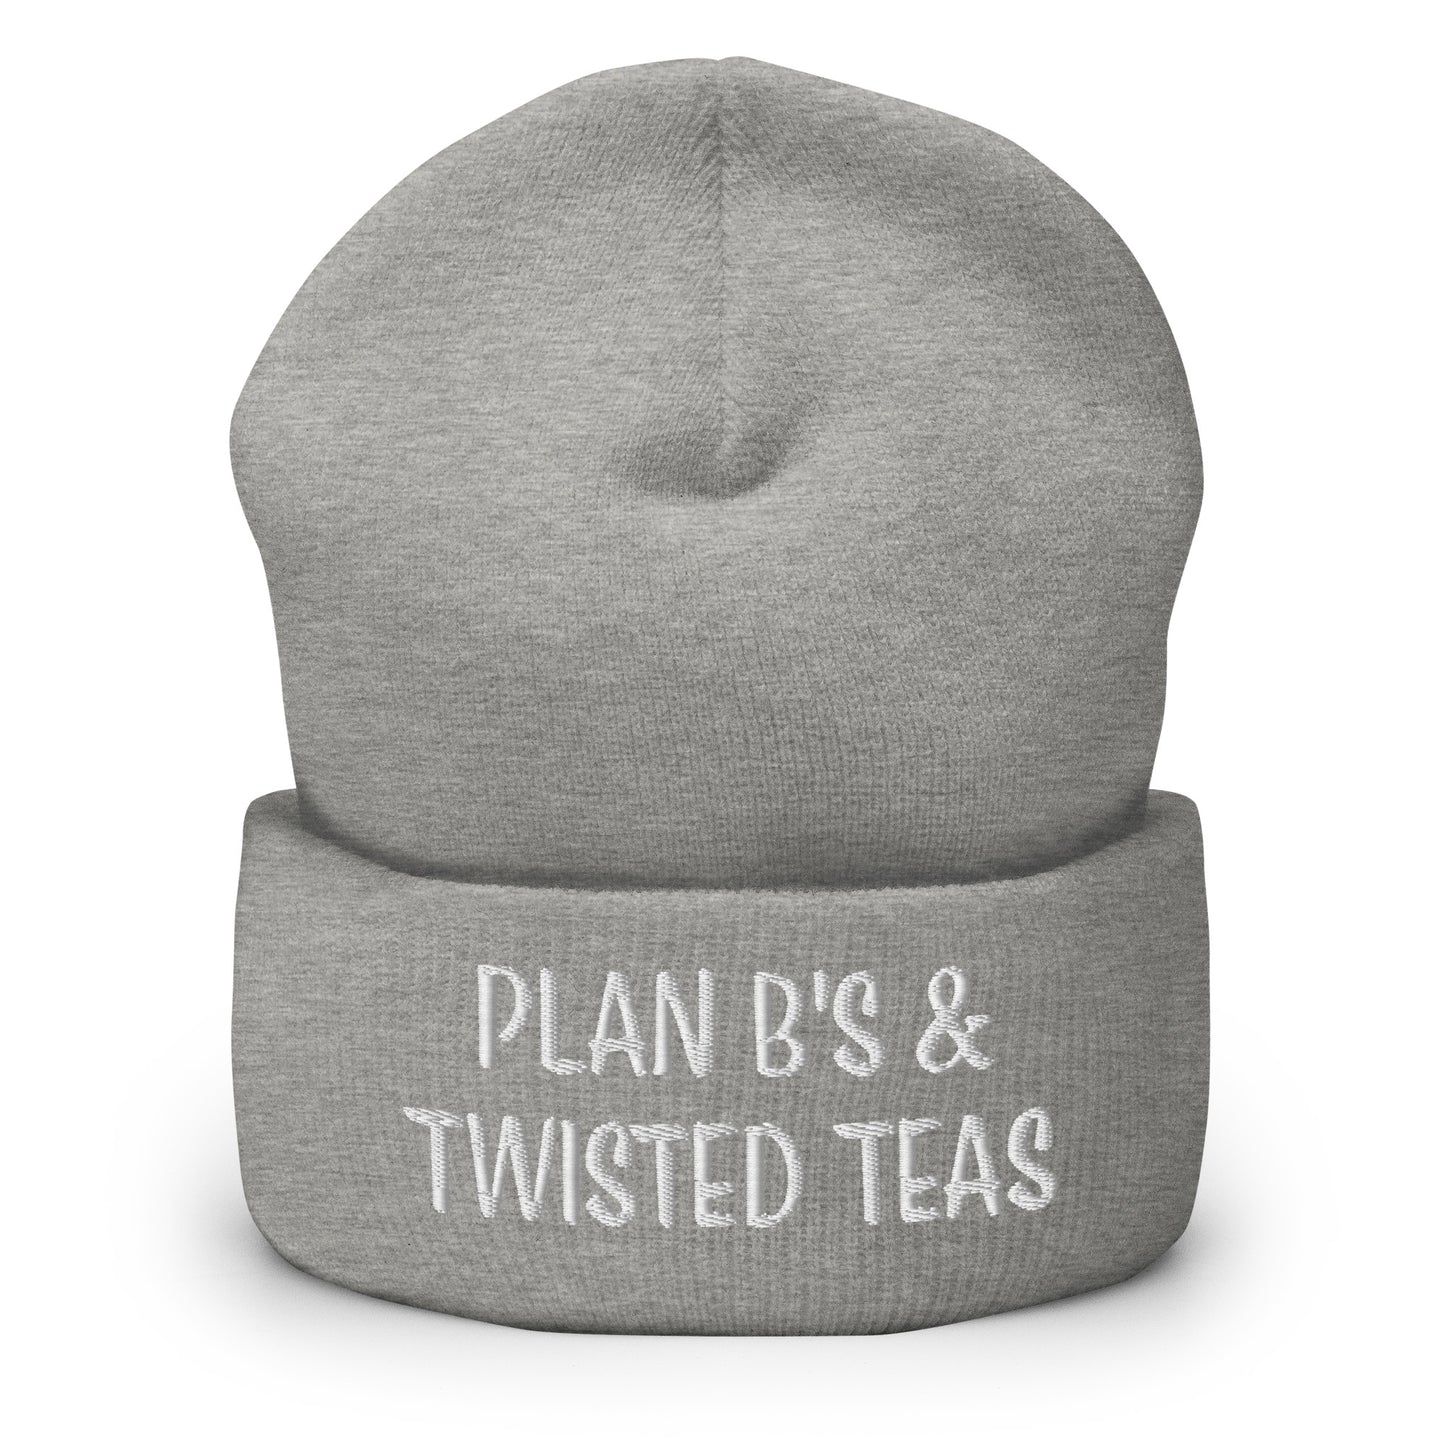 Plan B's and Twisted Teas Unisex Embroidered Cuffed Beanie